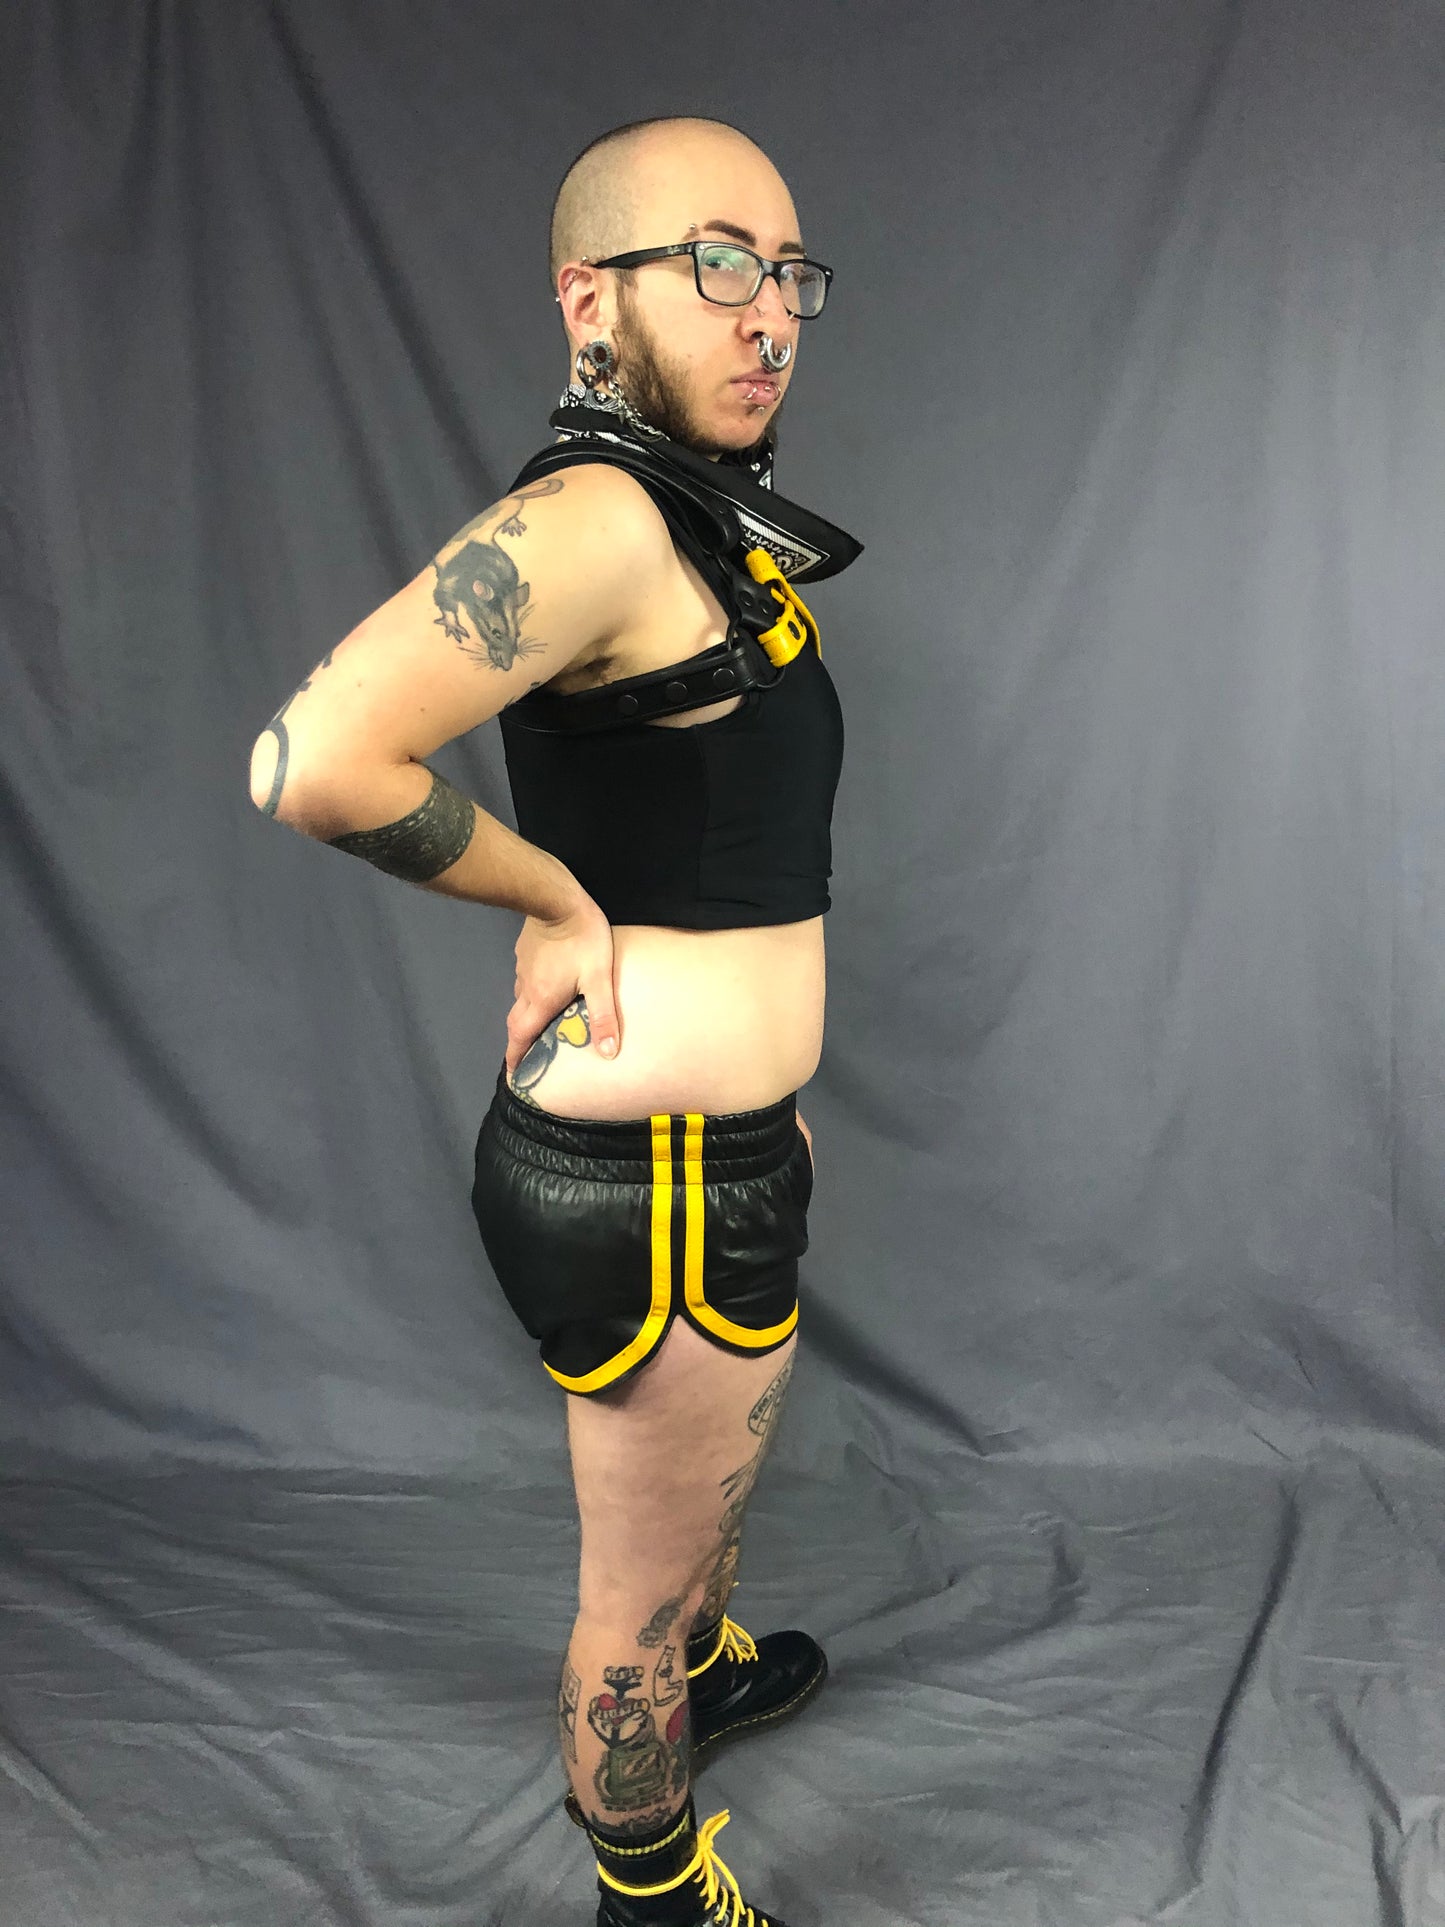 Right side view of the black and yellow prowler leather sport shorts.